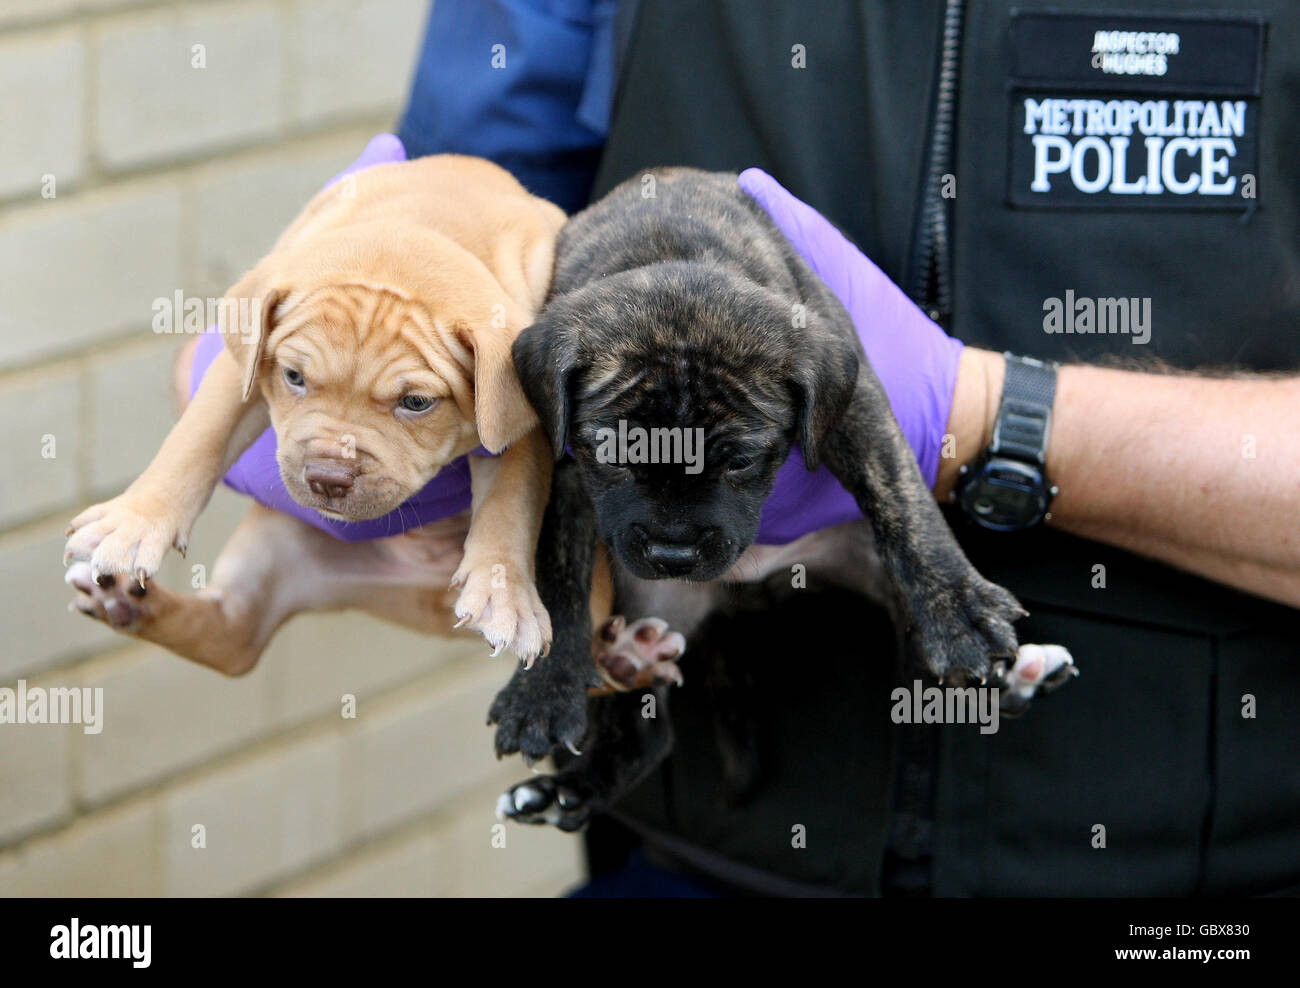 Metropolitan Police dog handlers remove pitbull puppies during a raid on an address in Kennington, south London, as part of operation Navara, targeting dangerous dogs. Stock Photo